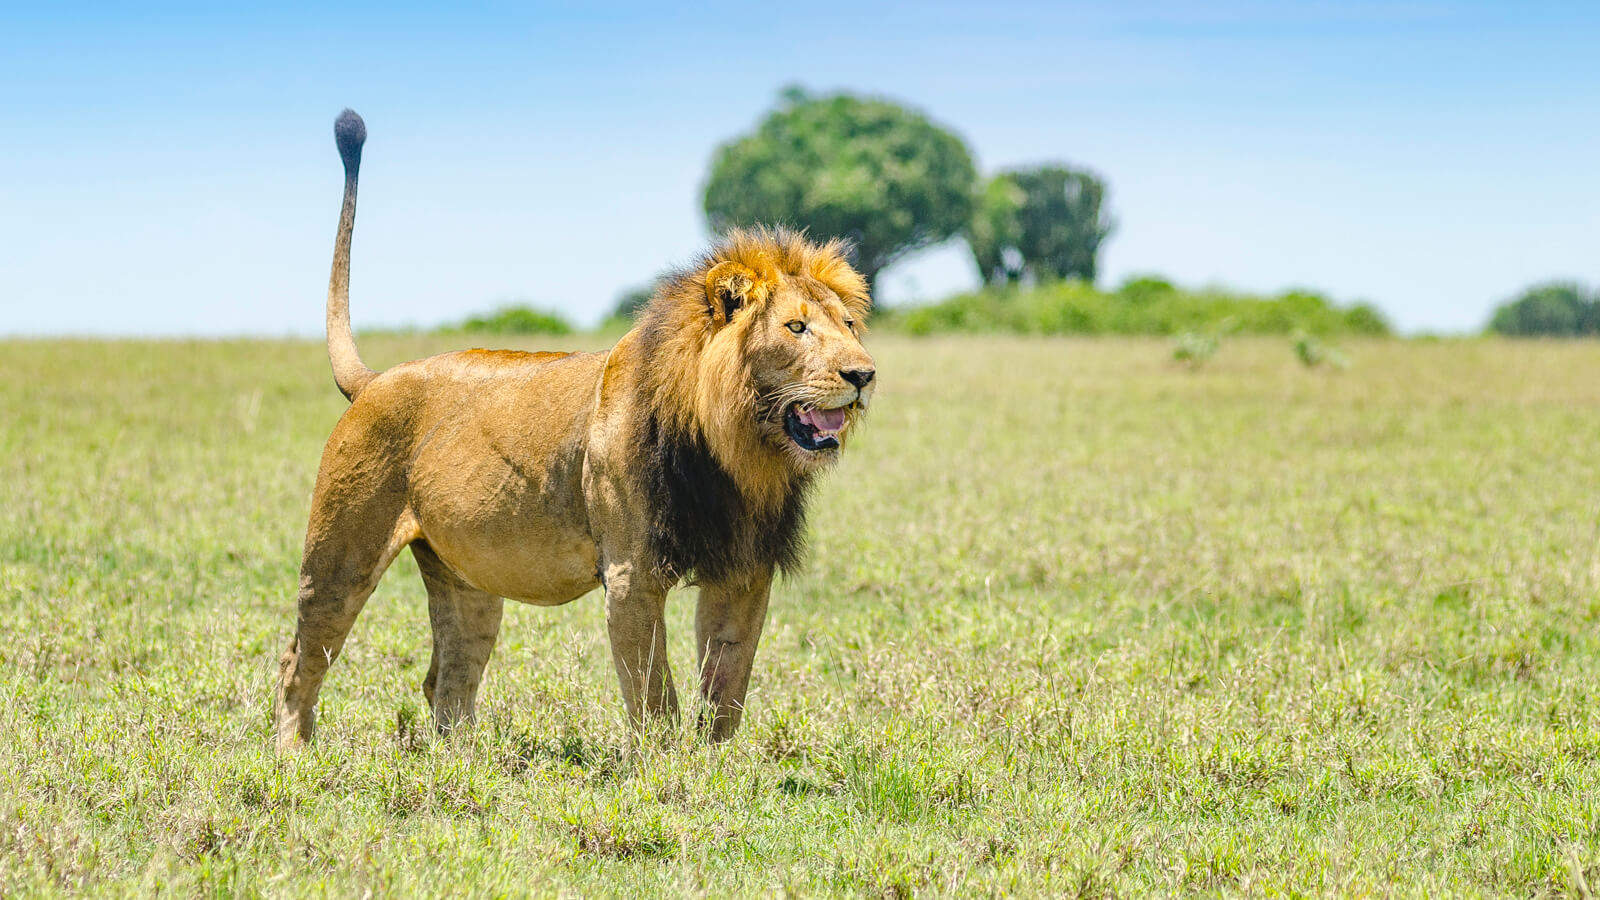 All About Tracking Lions in Uganda’s Queen Elizabeth National Park